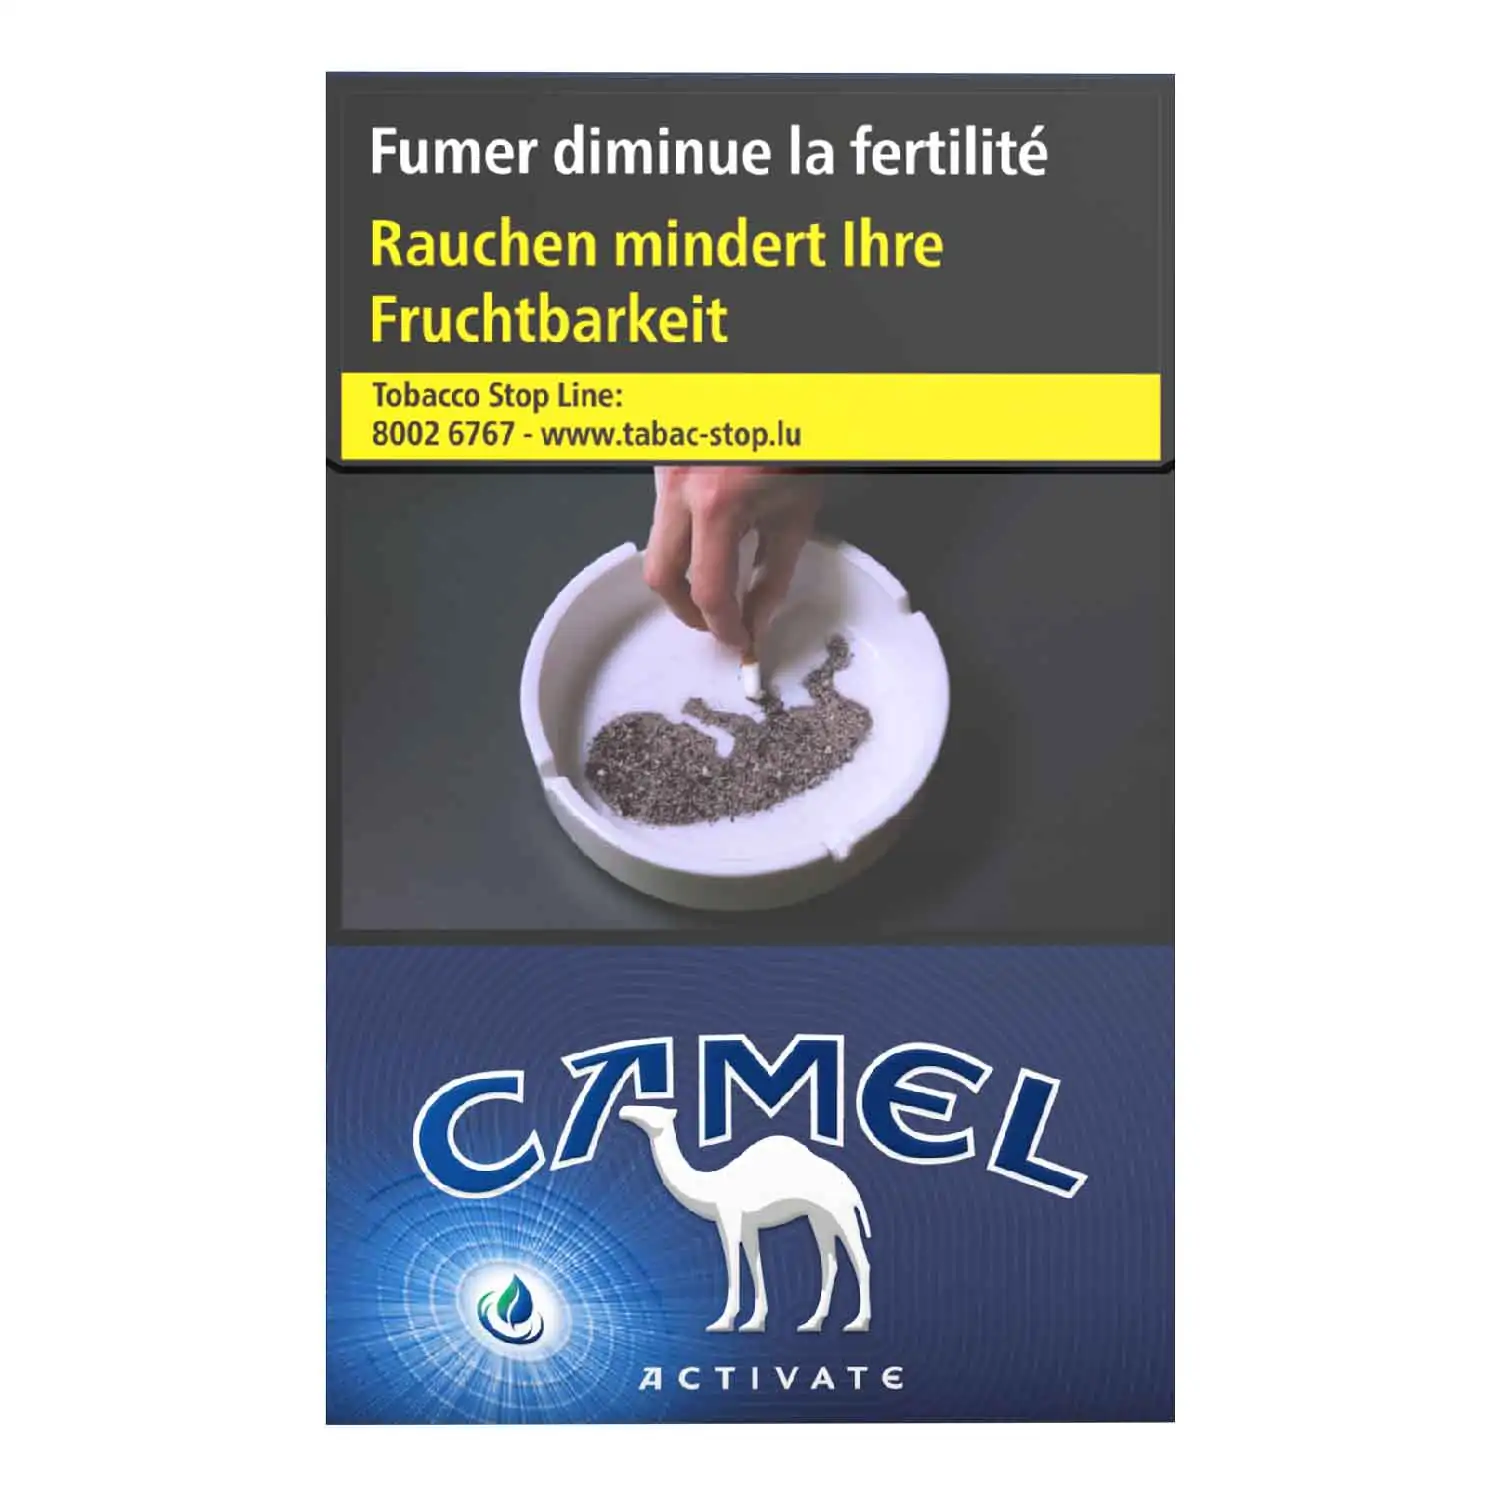 Camel activate 20 (S) - Buy at Real Tobacco